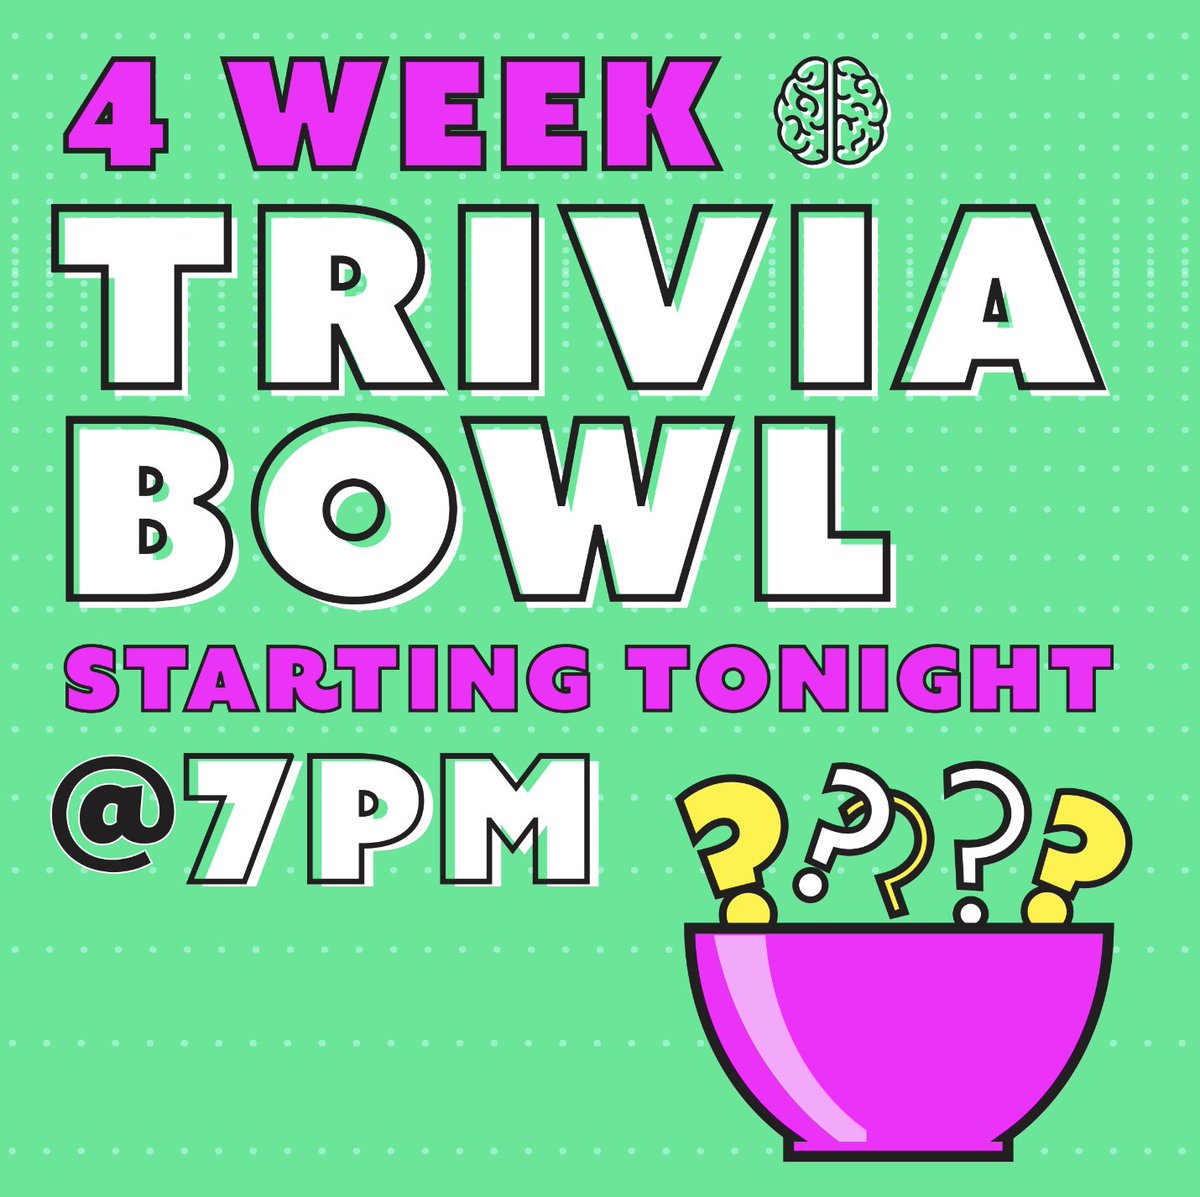 We're kicking off a month long trivia bowl tonight at 7pm. Glorious prizes and a beautiful trophy await the winning team. If you've got what it takes some eat @satelliteofpizza and show off your smarts.